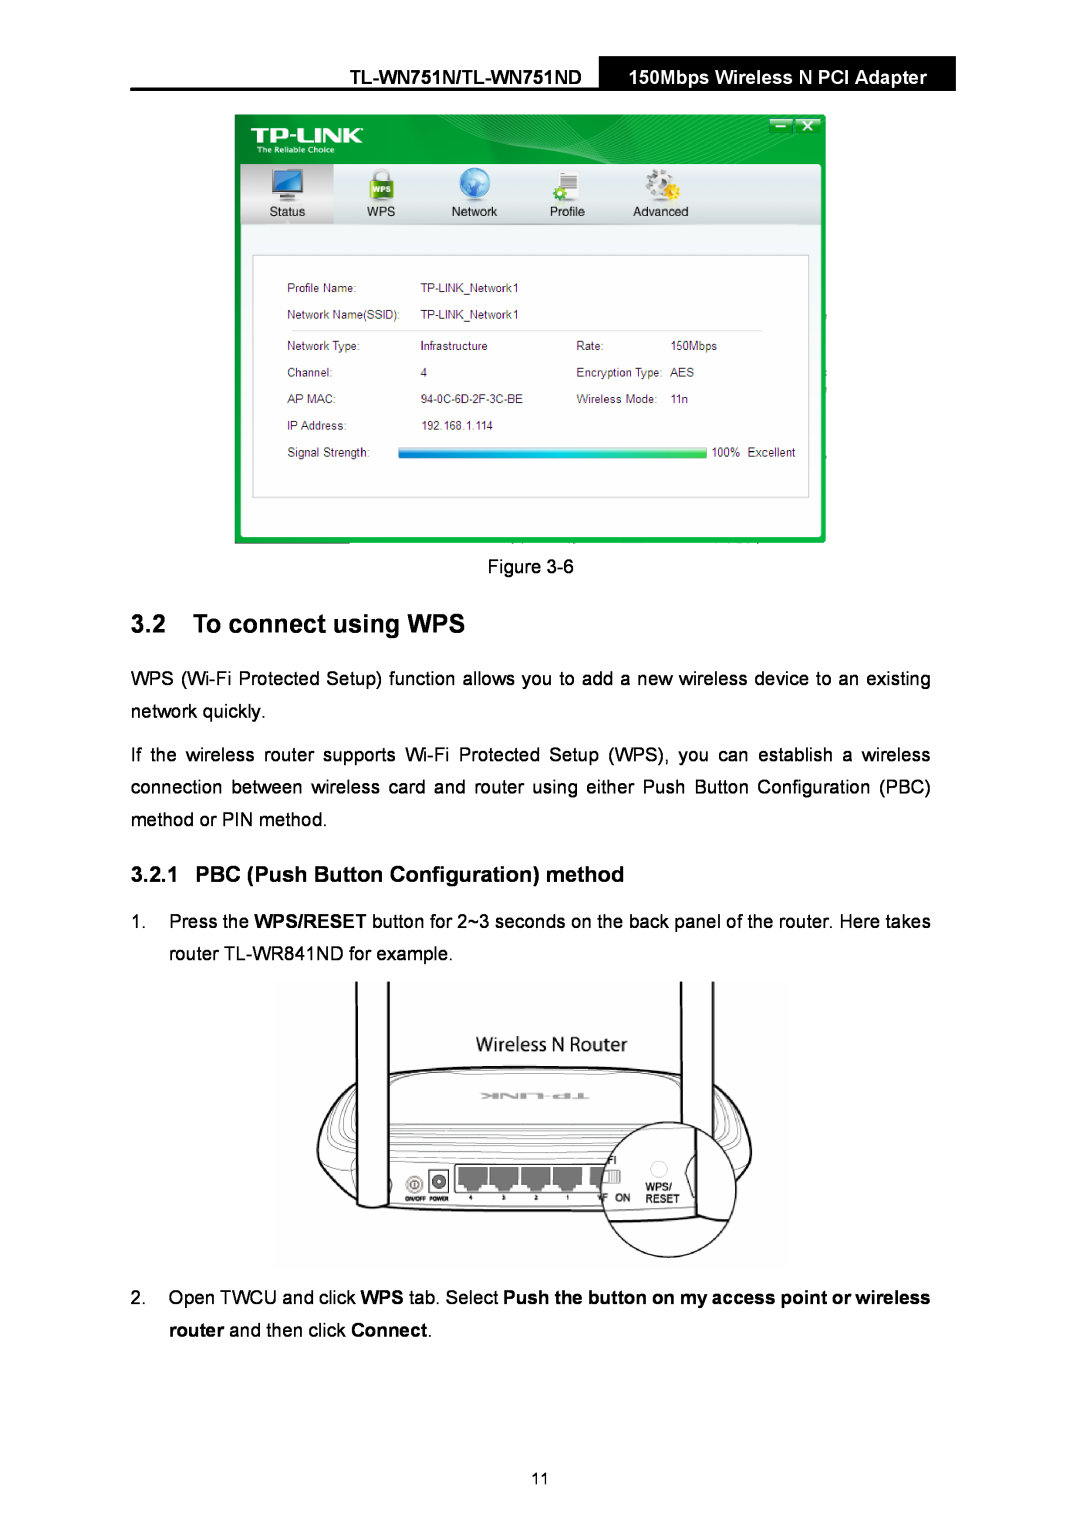 TP-Link TTL-WN751N manual To connect using WPS, PBC Push Button Configuration method, TL-WN751N/TL-WN751ND 